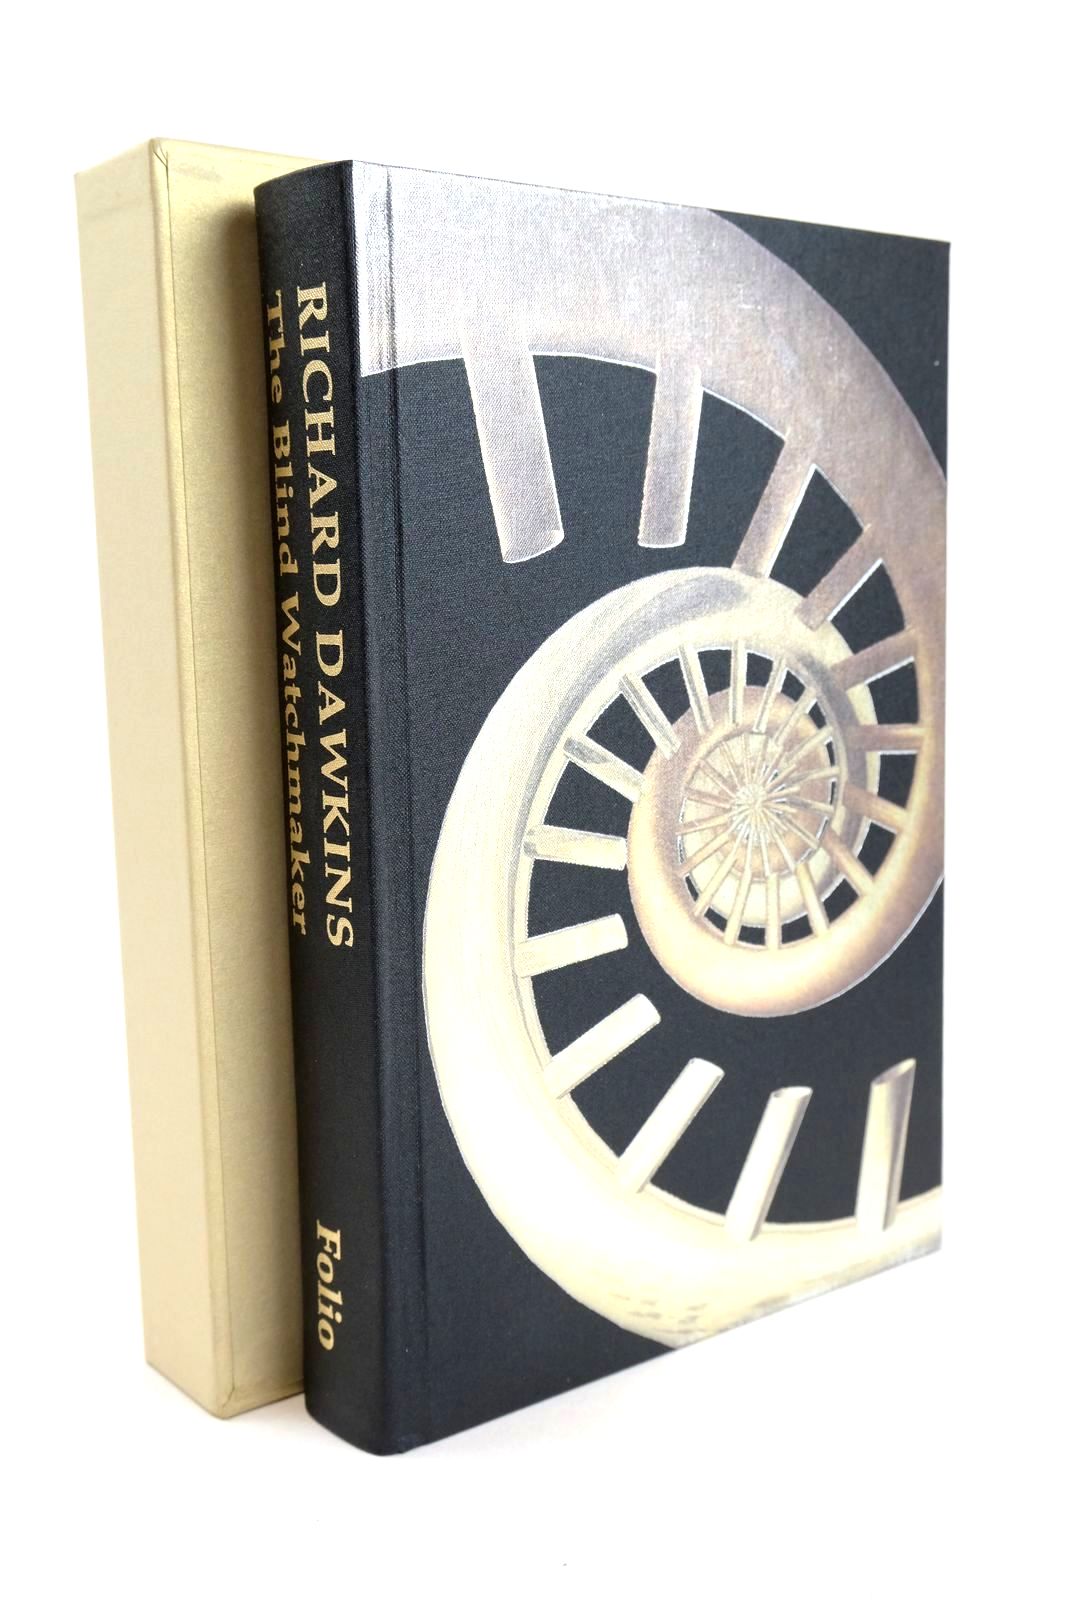 Photo of THE BLIND WATCHMAKER written by Dawkins, Richard published by Folio Society (STOCK CODE: 1327594)  for sale by Stella & Rose's Books